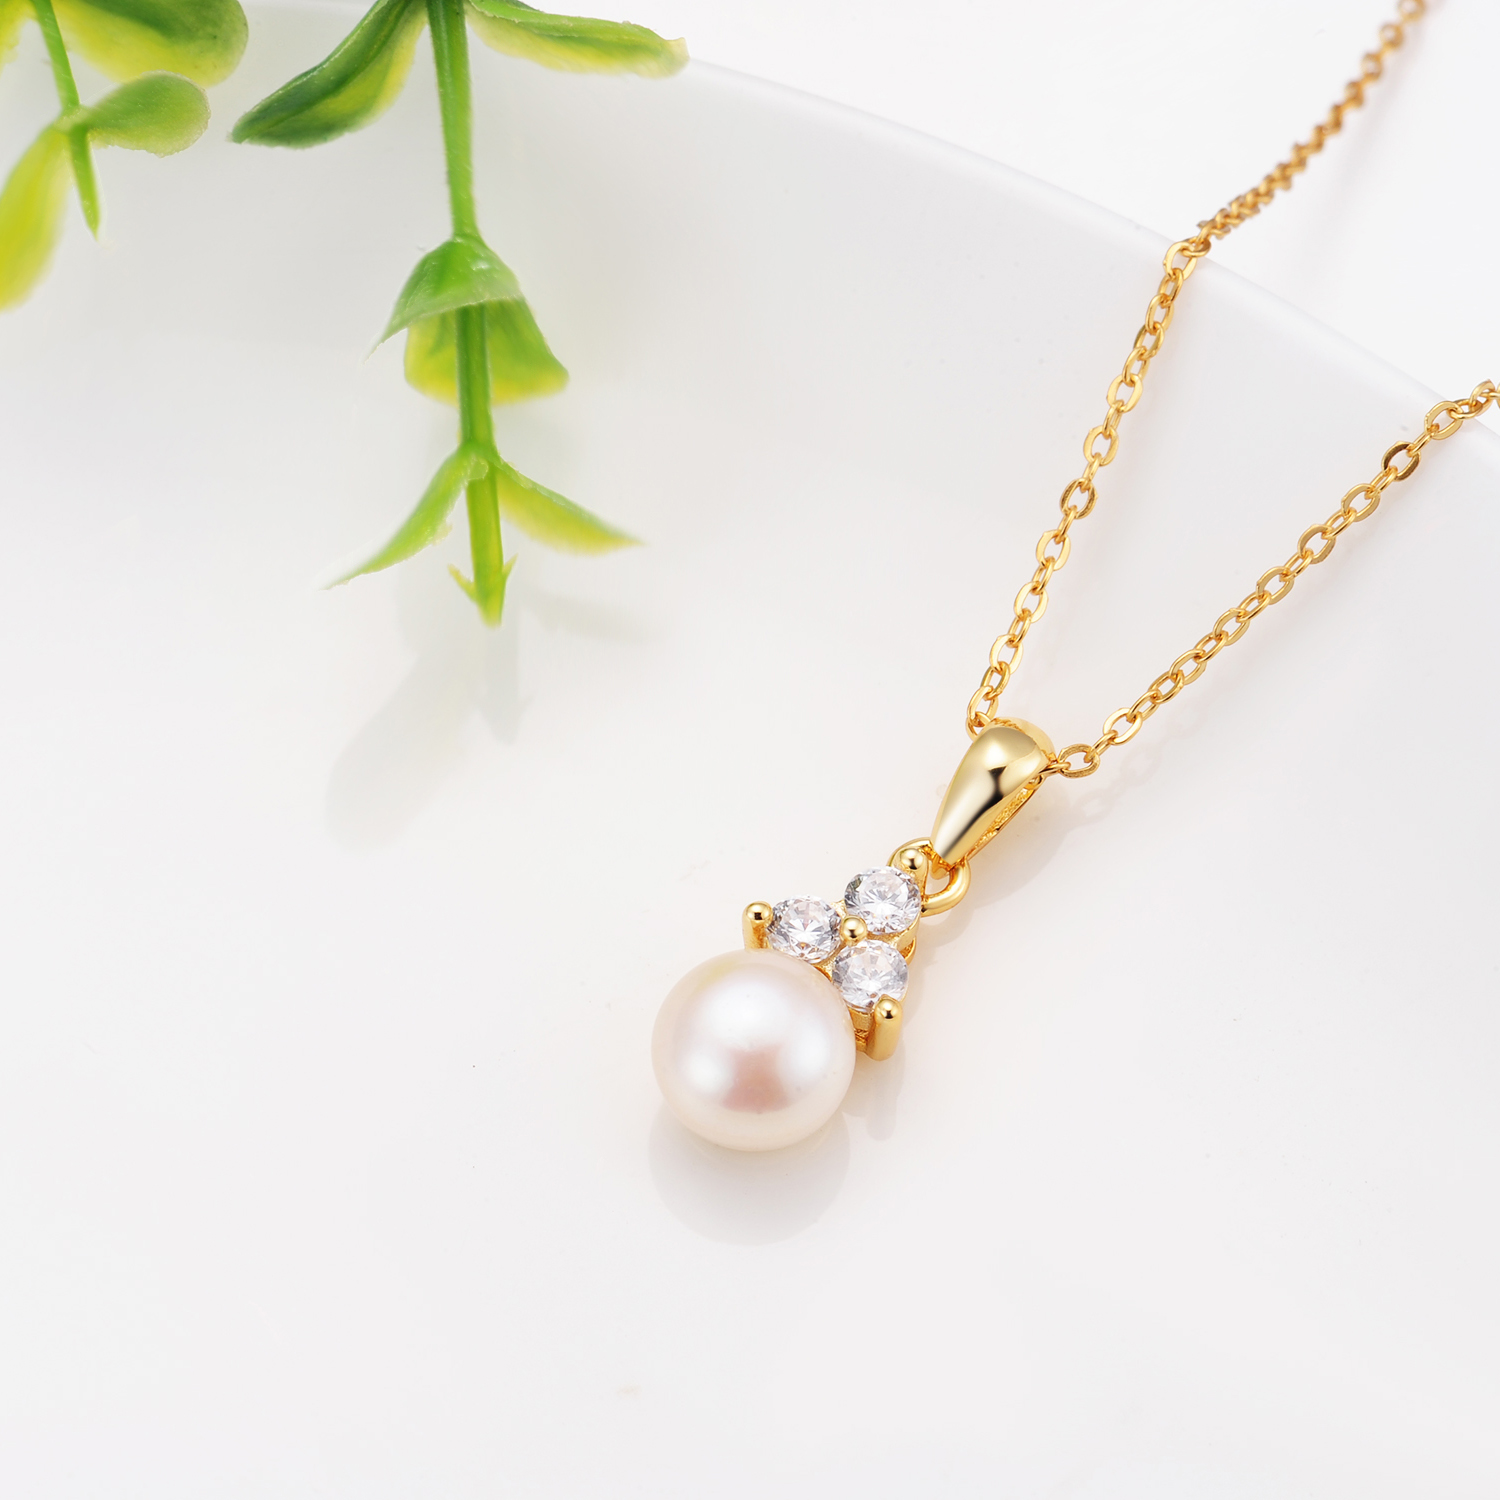 Sterling SilverGold Plated jewelry Zirconia Freshwater Cultured Natural Real Pearl pendant Necklace (图2)